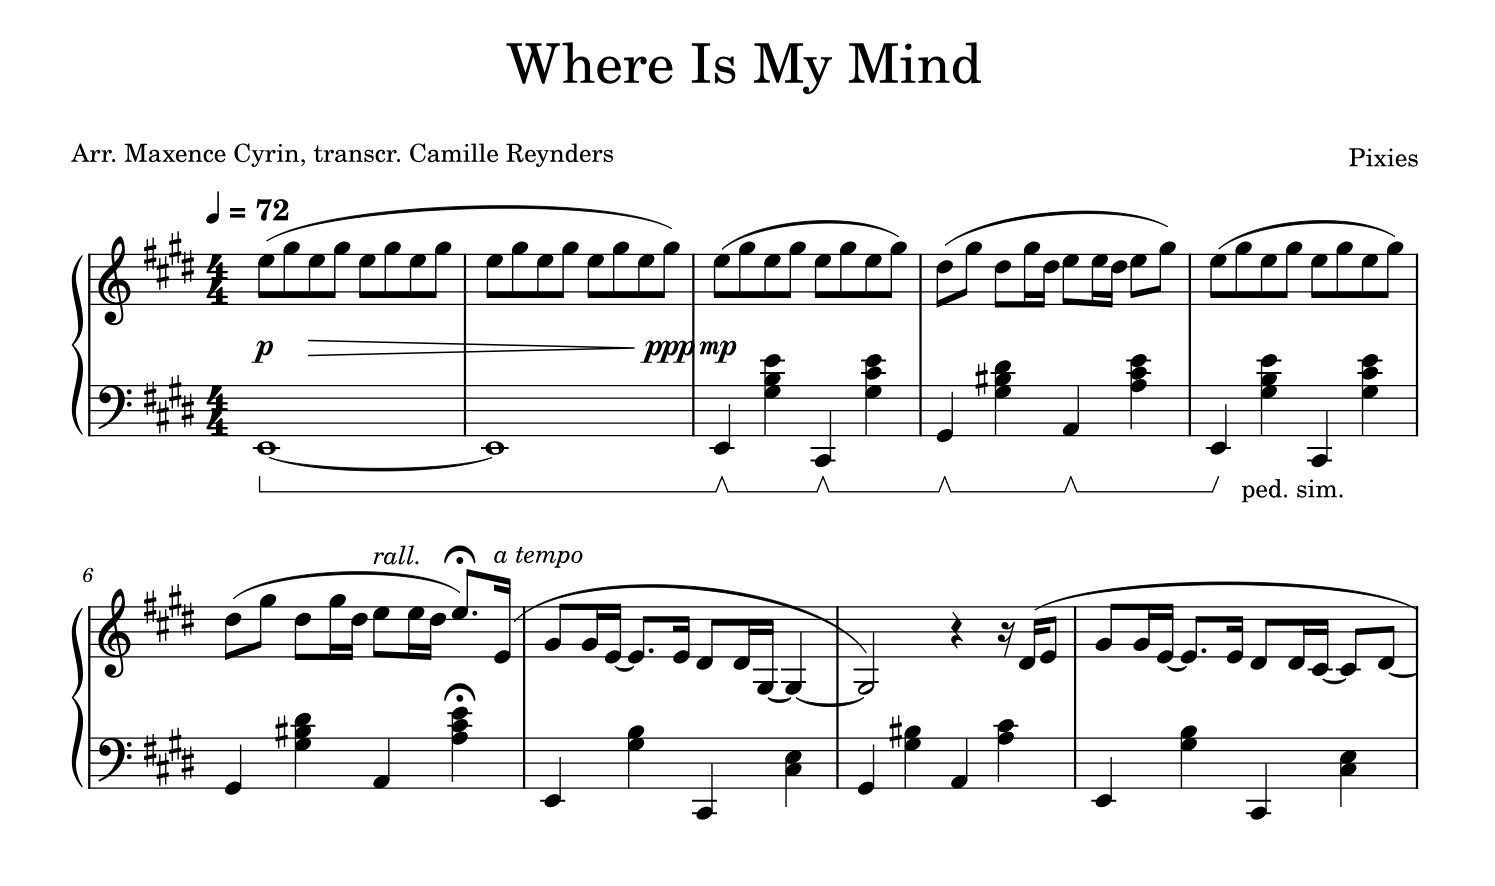 Where Is My Mind Pixies Piano Sheet Music